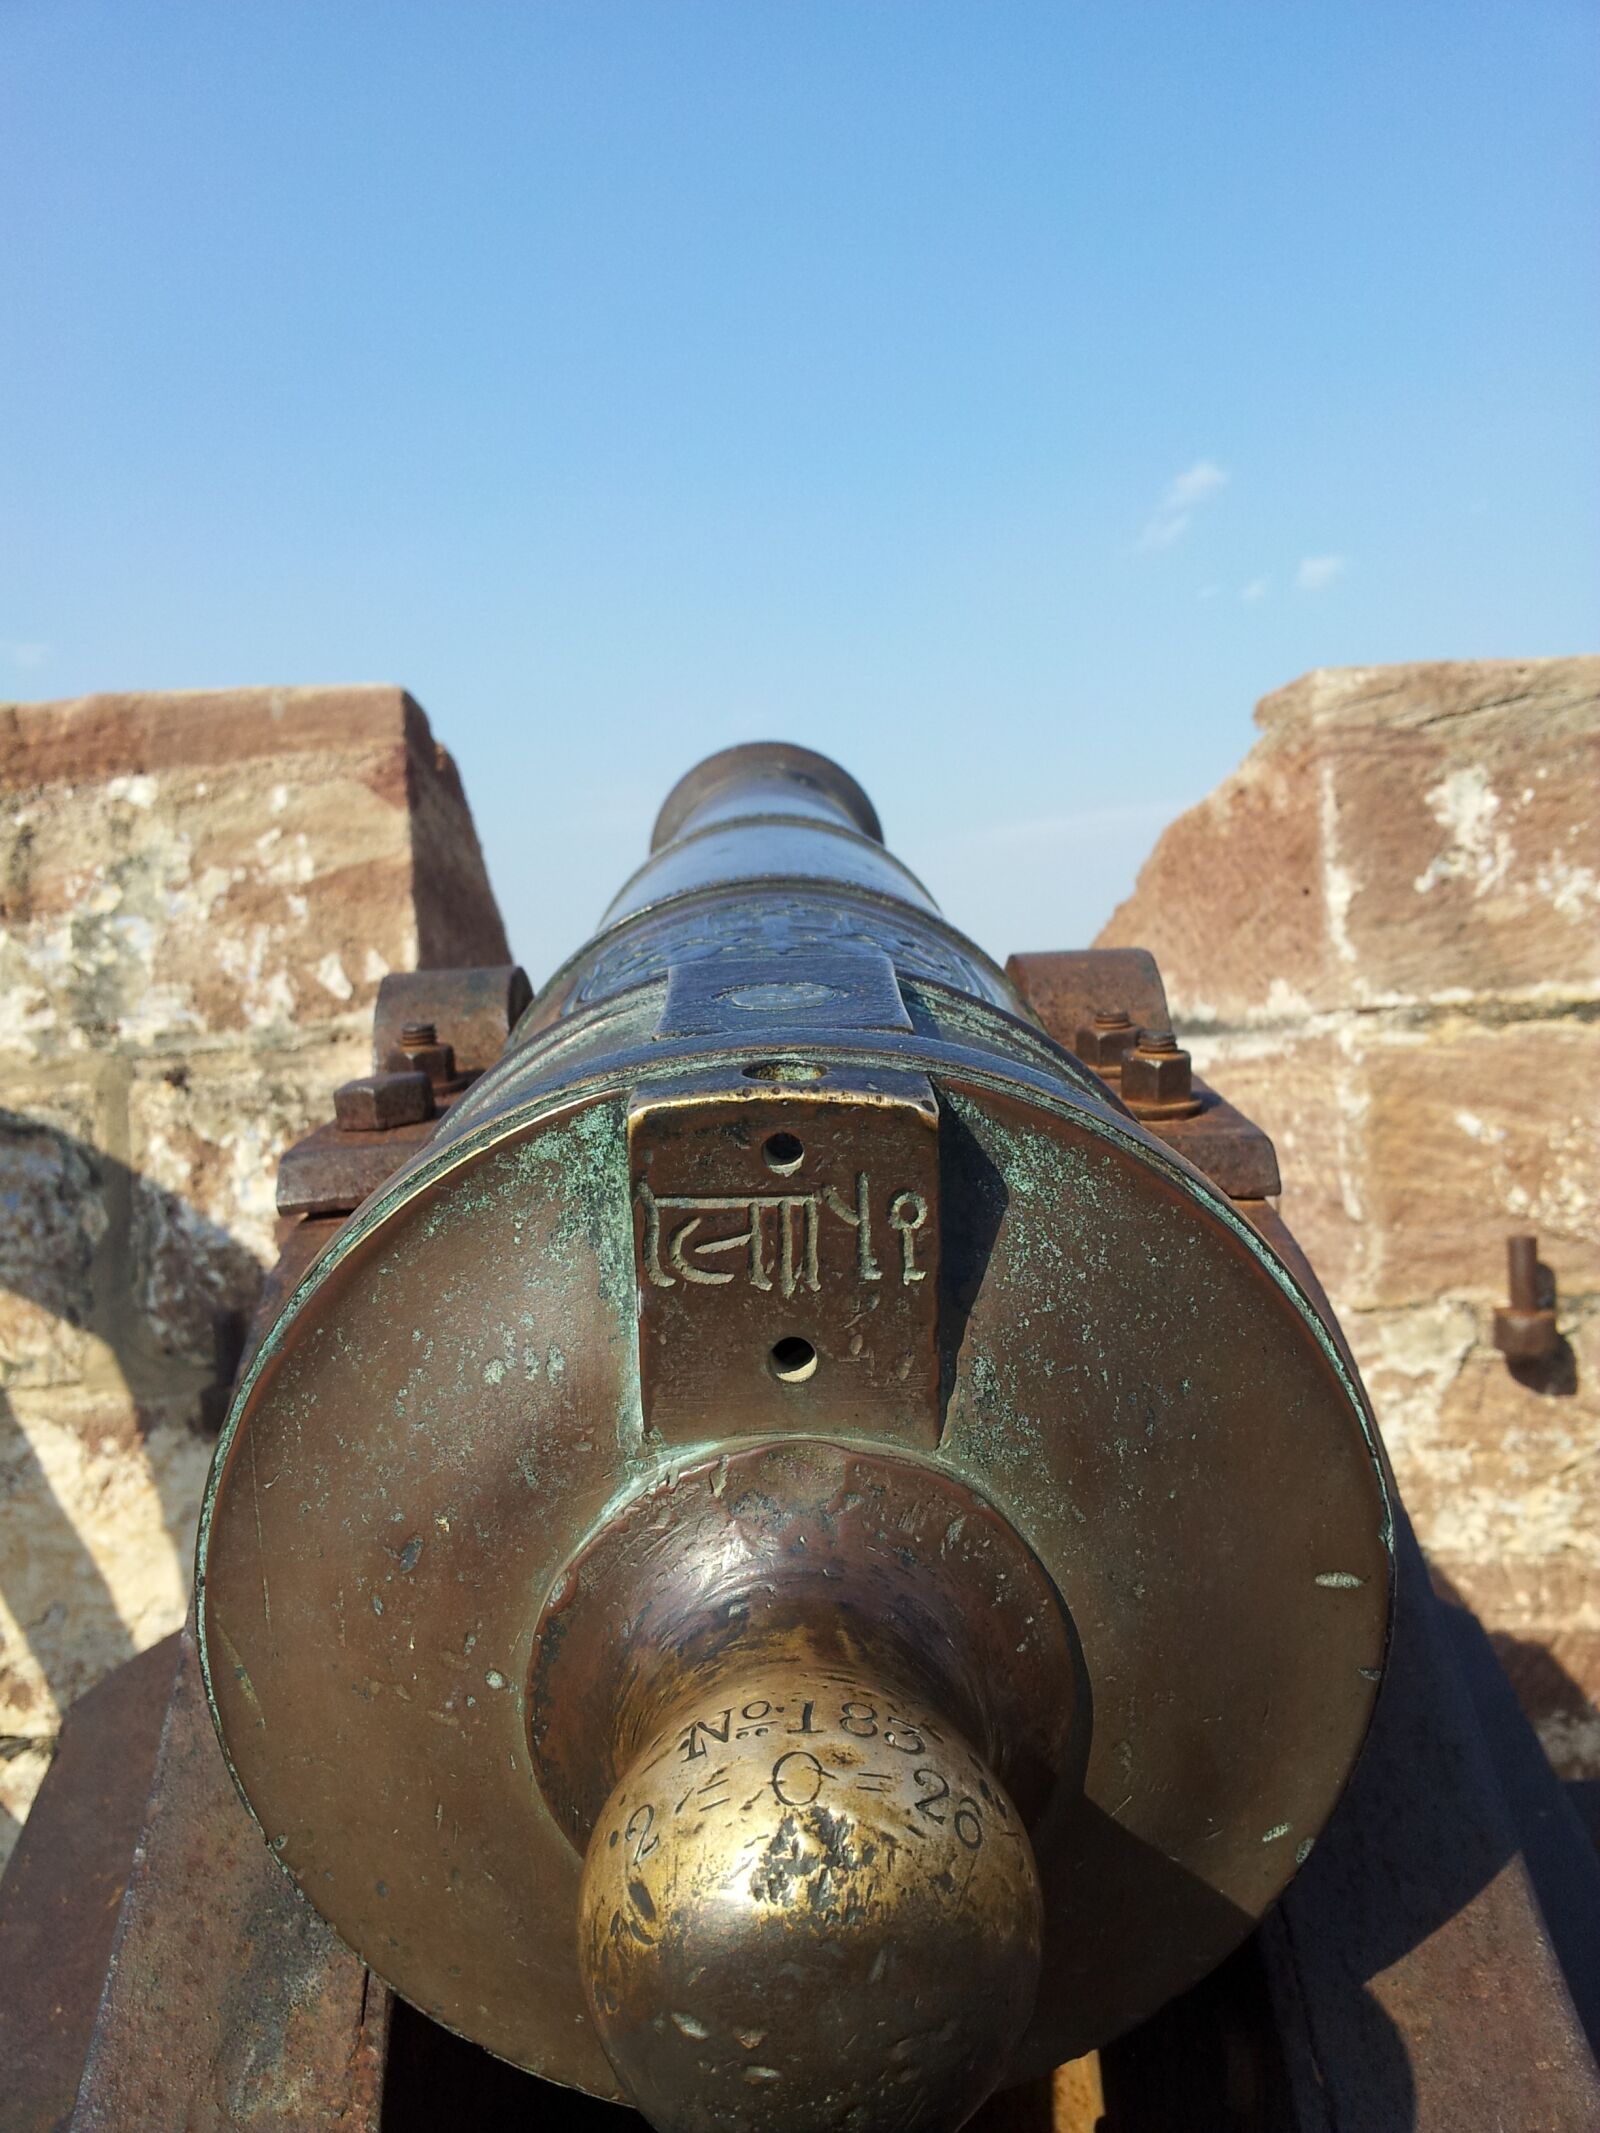 Samsung Galaxy Note sample photo. Cannon, history, travel photography